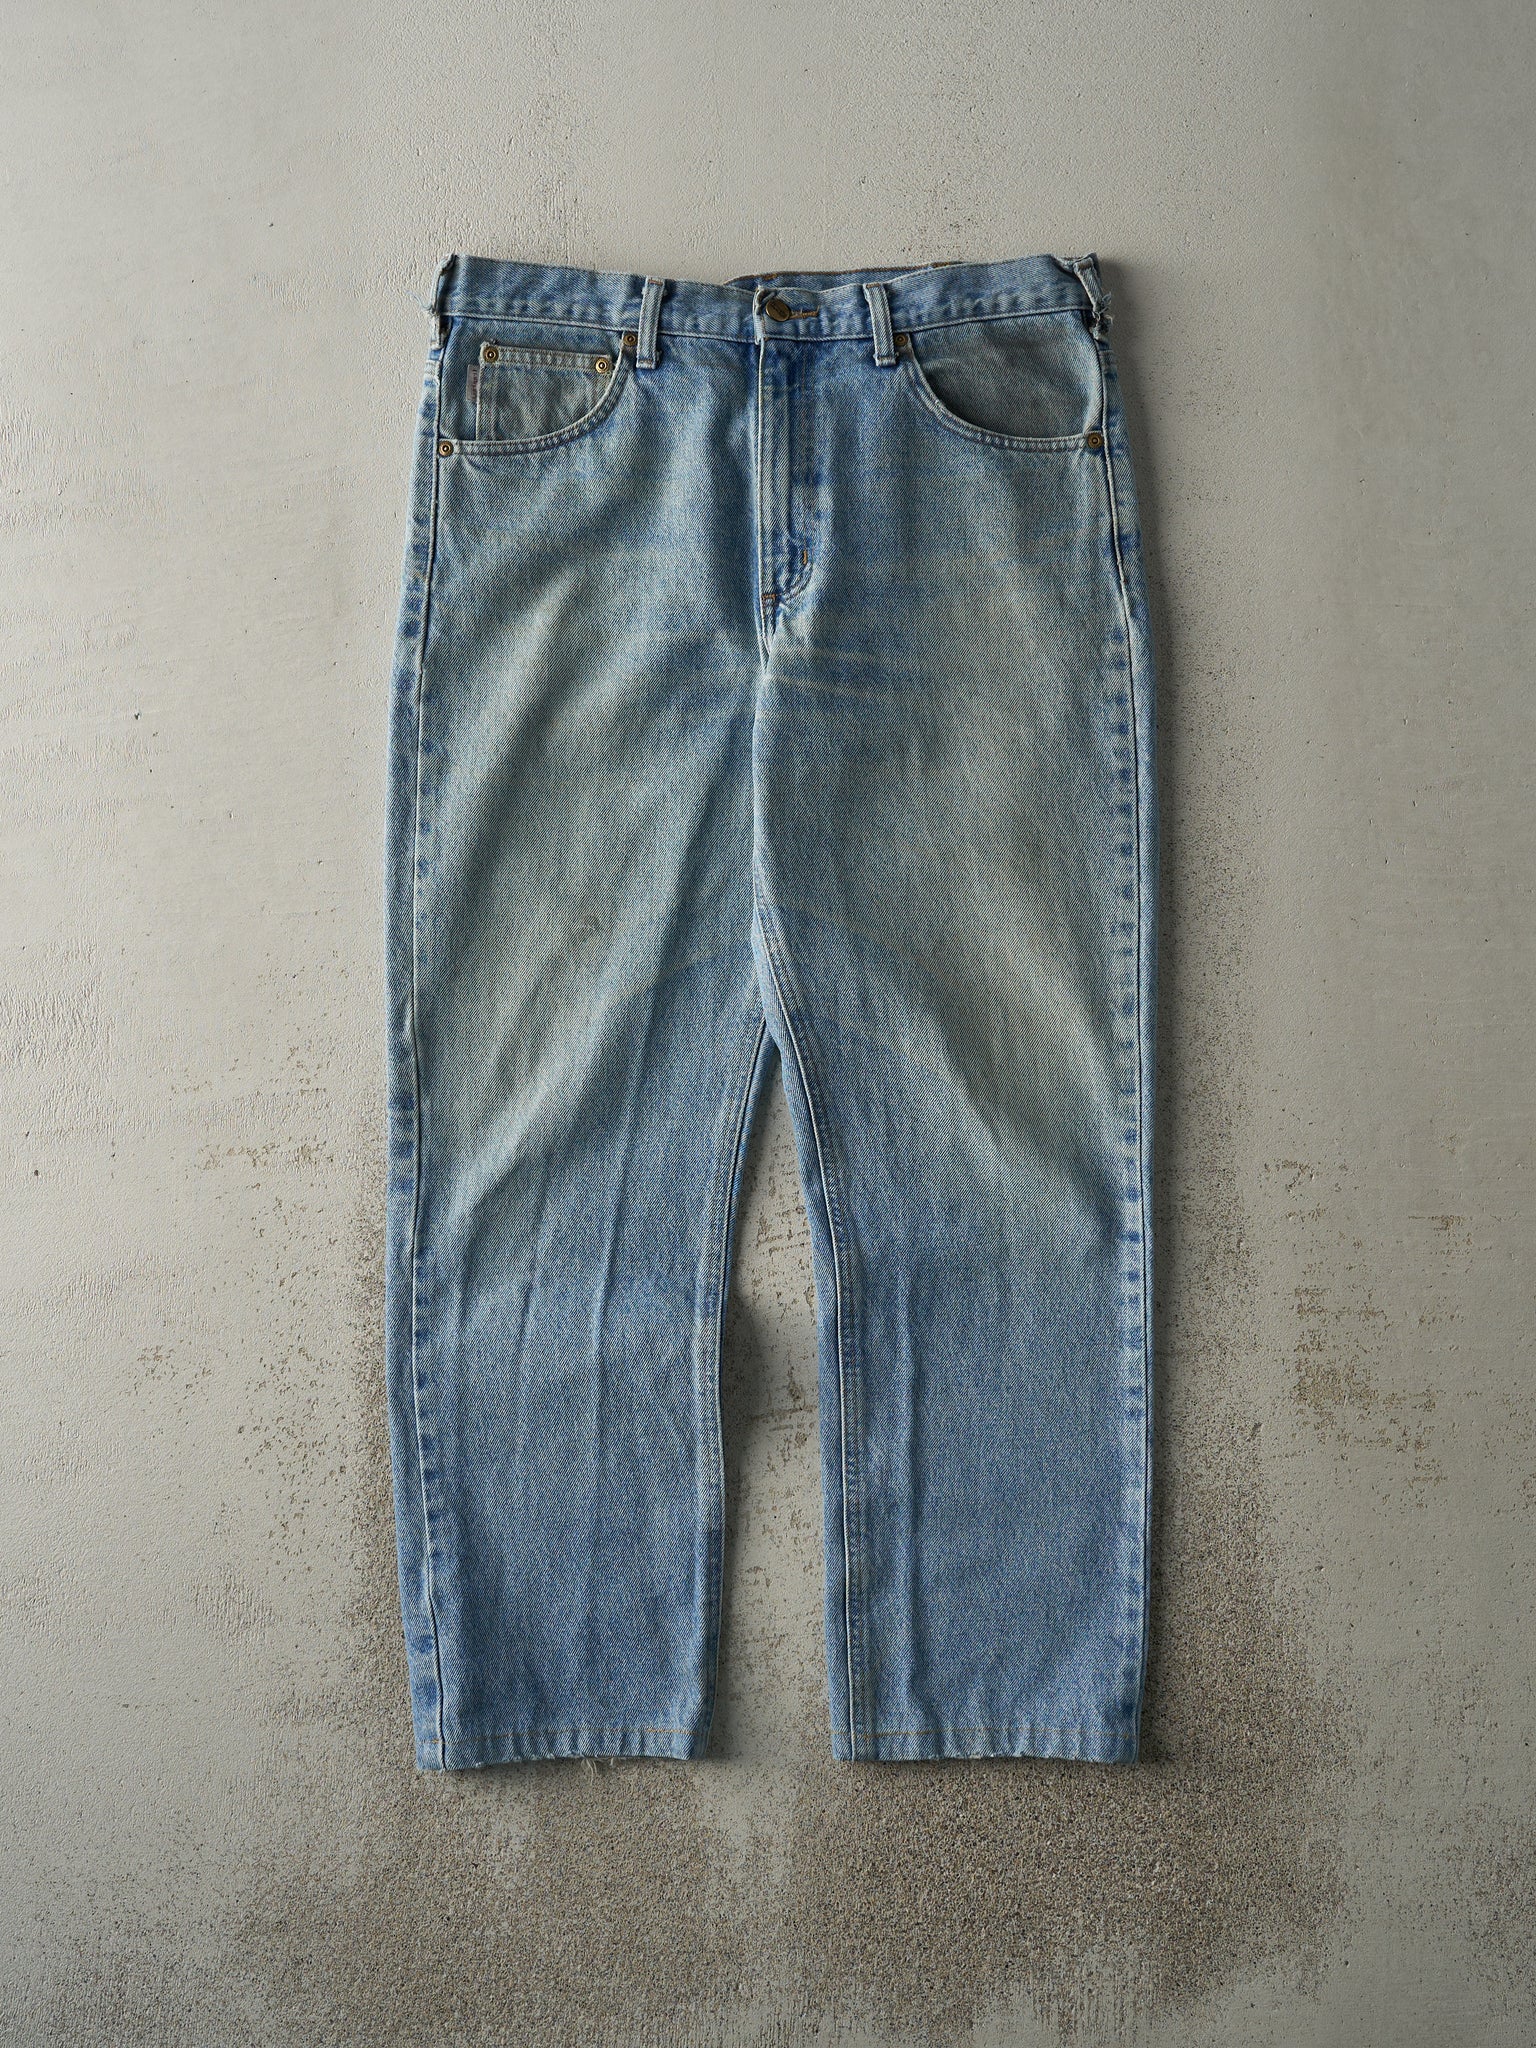 Vintage 90s Light Wash Carhartt Traditional Fit Jeans (34x28.5)